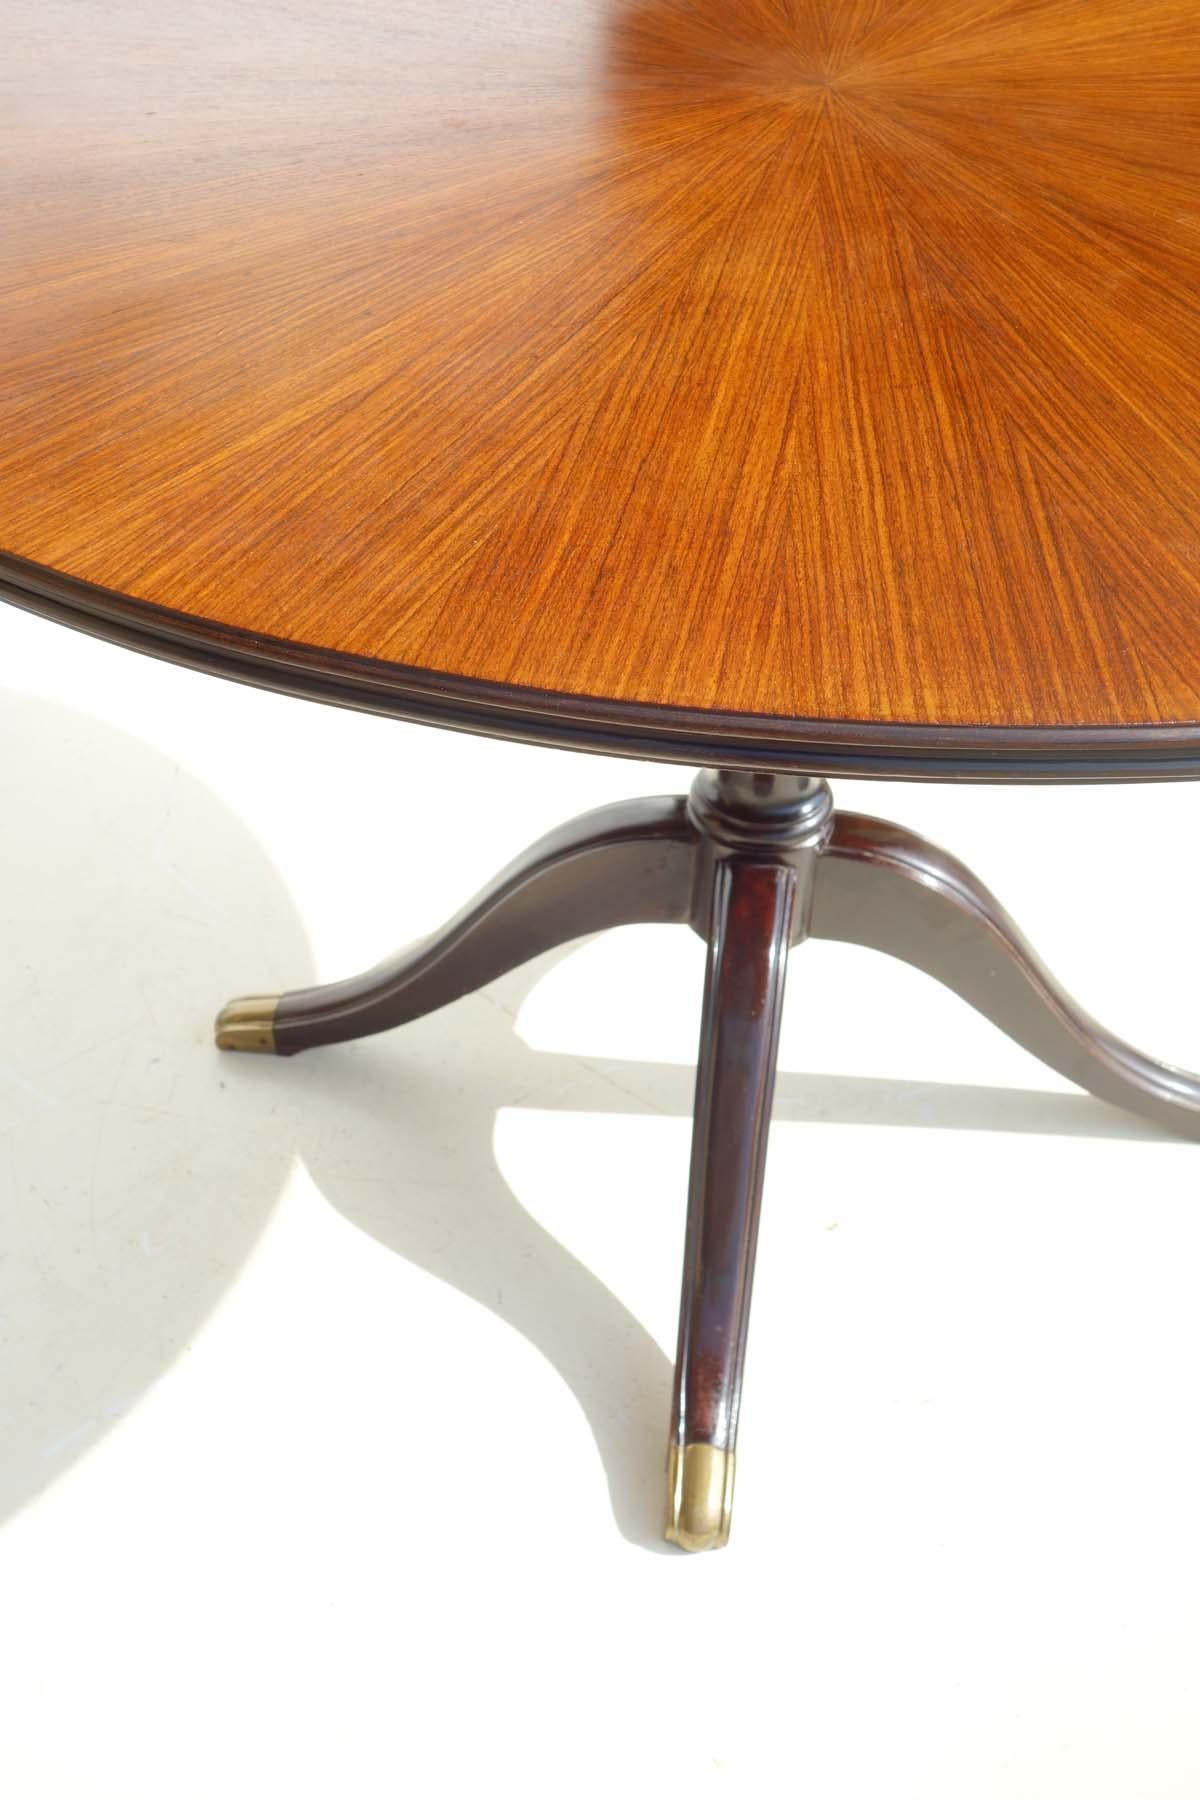 1950 Paolo Buffa Permanente Cantu Midcentury Italy Design Wood Dining Table In Excellent Condition For Sale In Brescia, IT